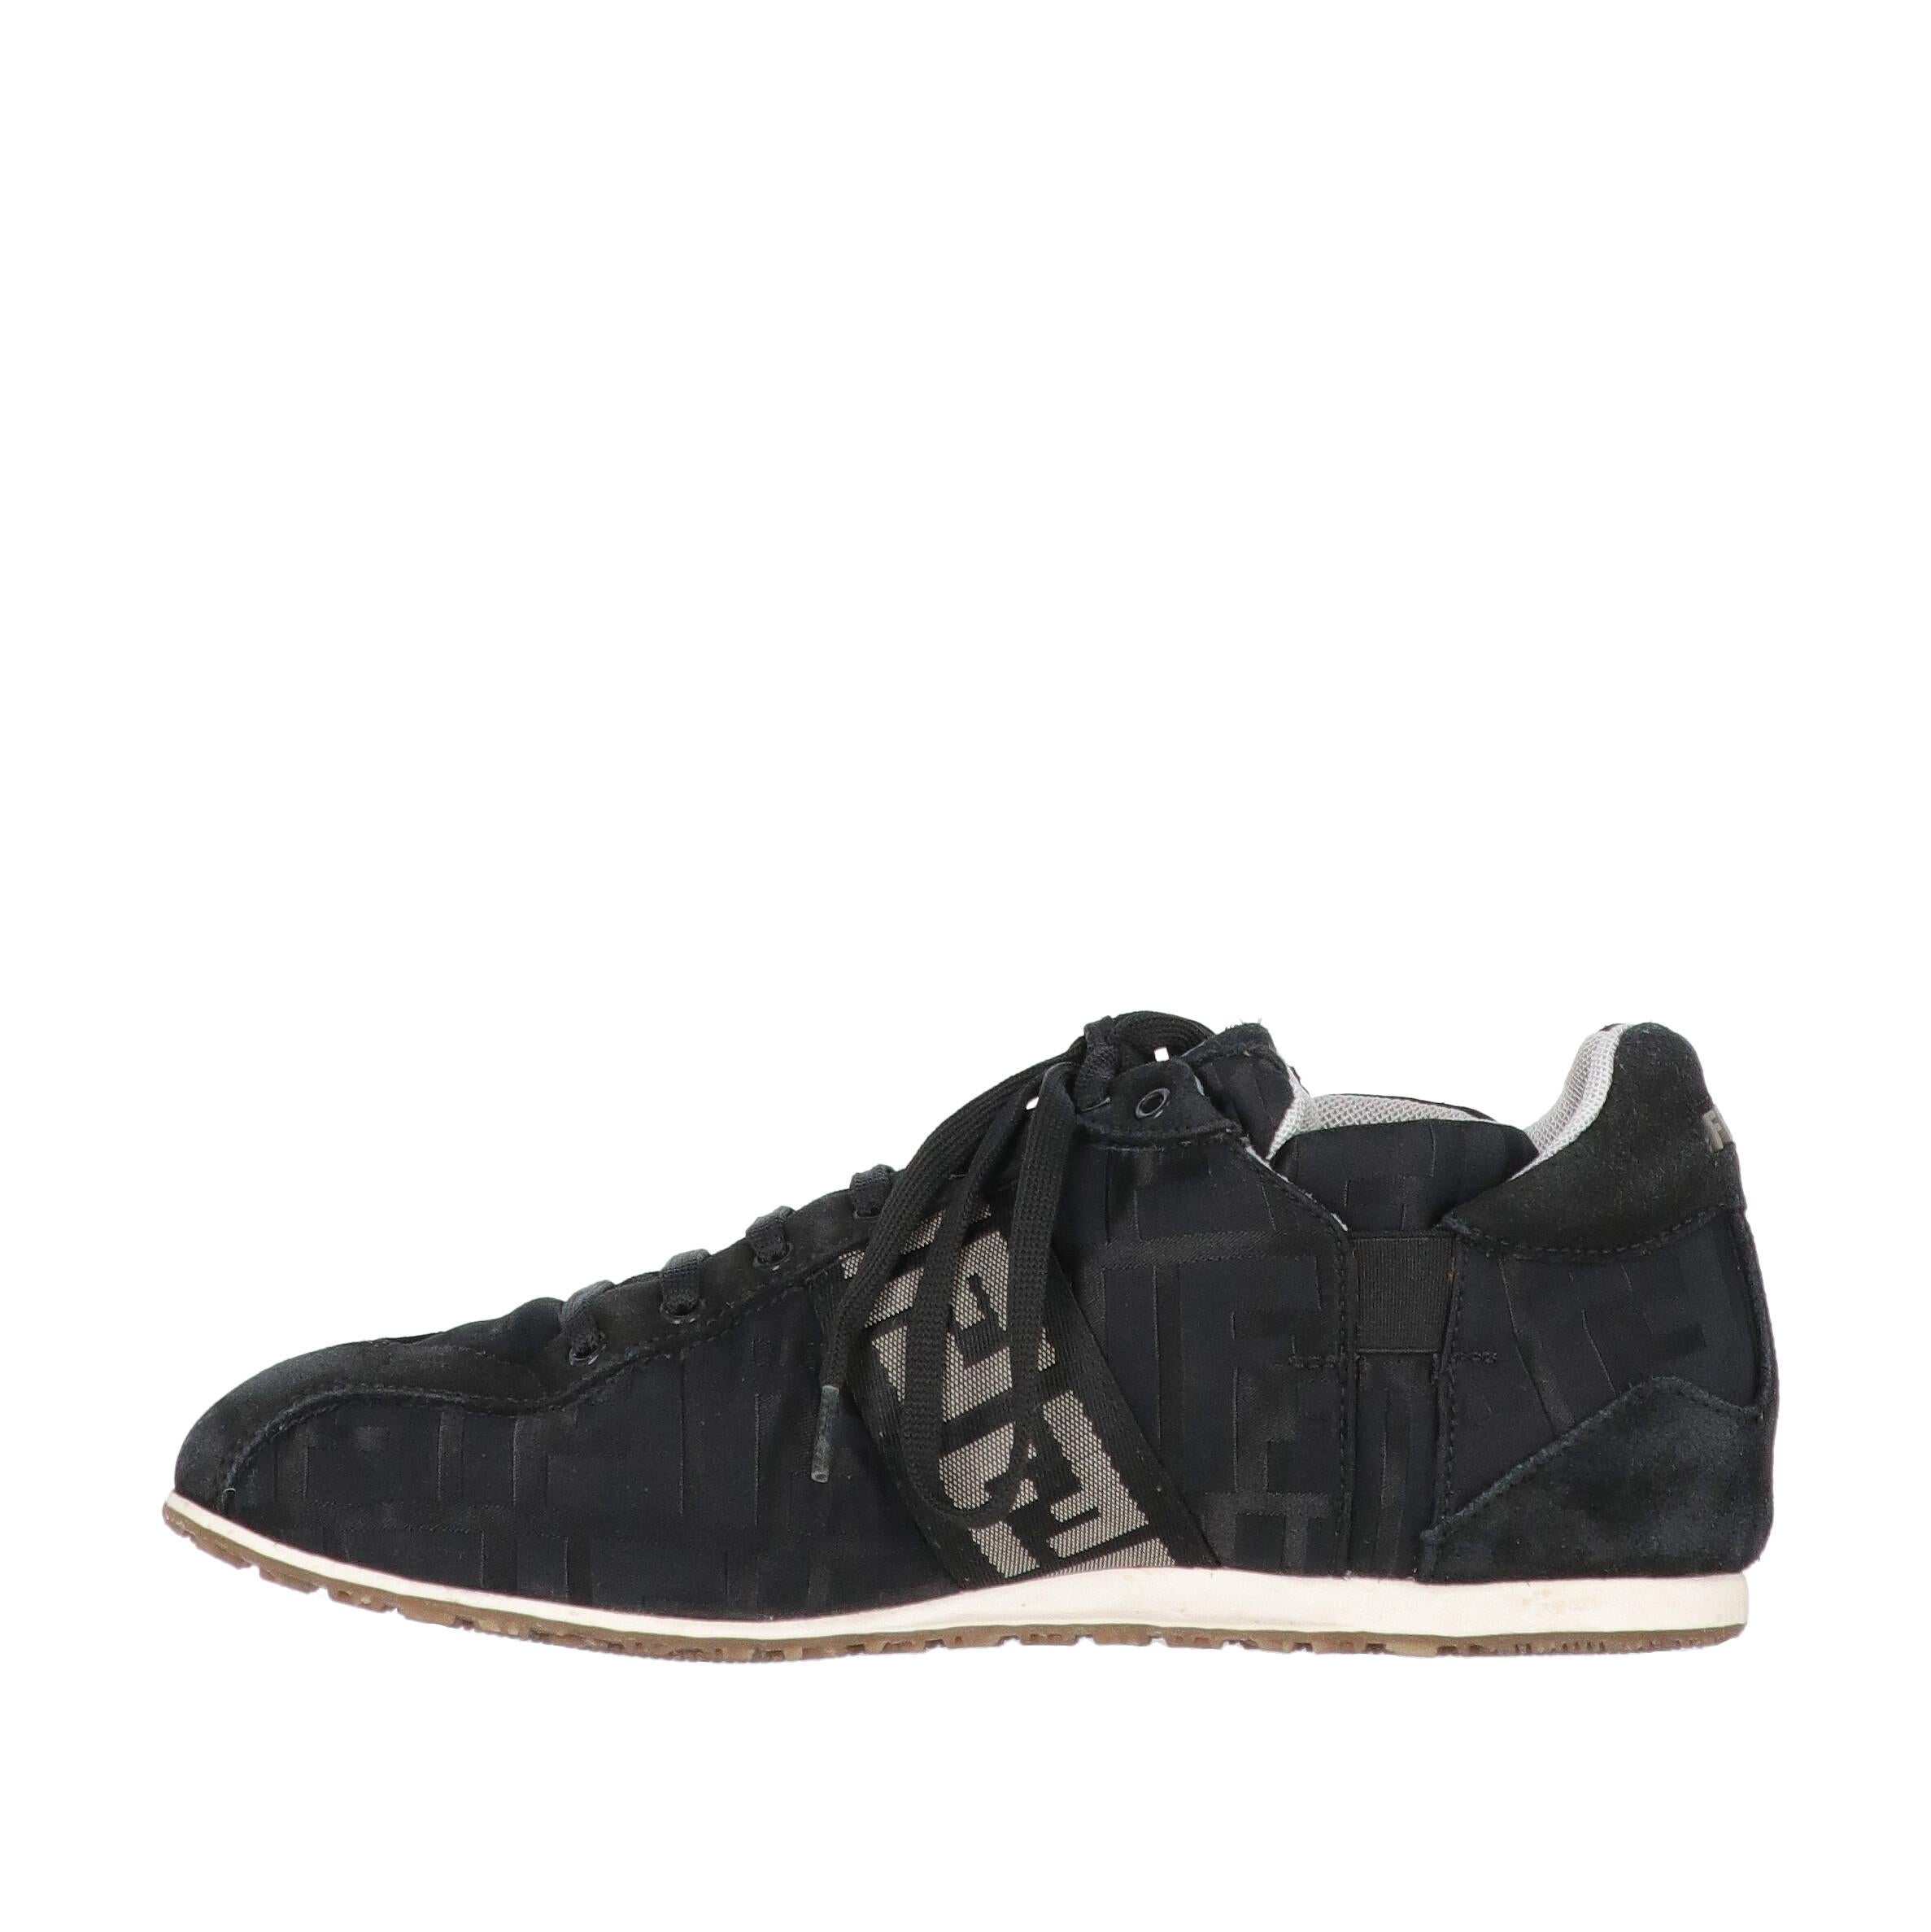 Fendi black monogram pumpkin fabric lace-up shoes with suede details. Round toe, two side logoed bands and rubber sole.

Size: 37 EU

Insole: 24 cm

Product code: X0415

Notes: The shoes show signs of wear on the suede and on the sole, as shown in